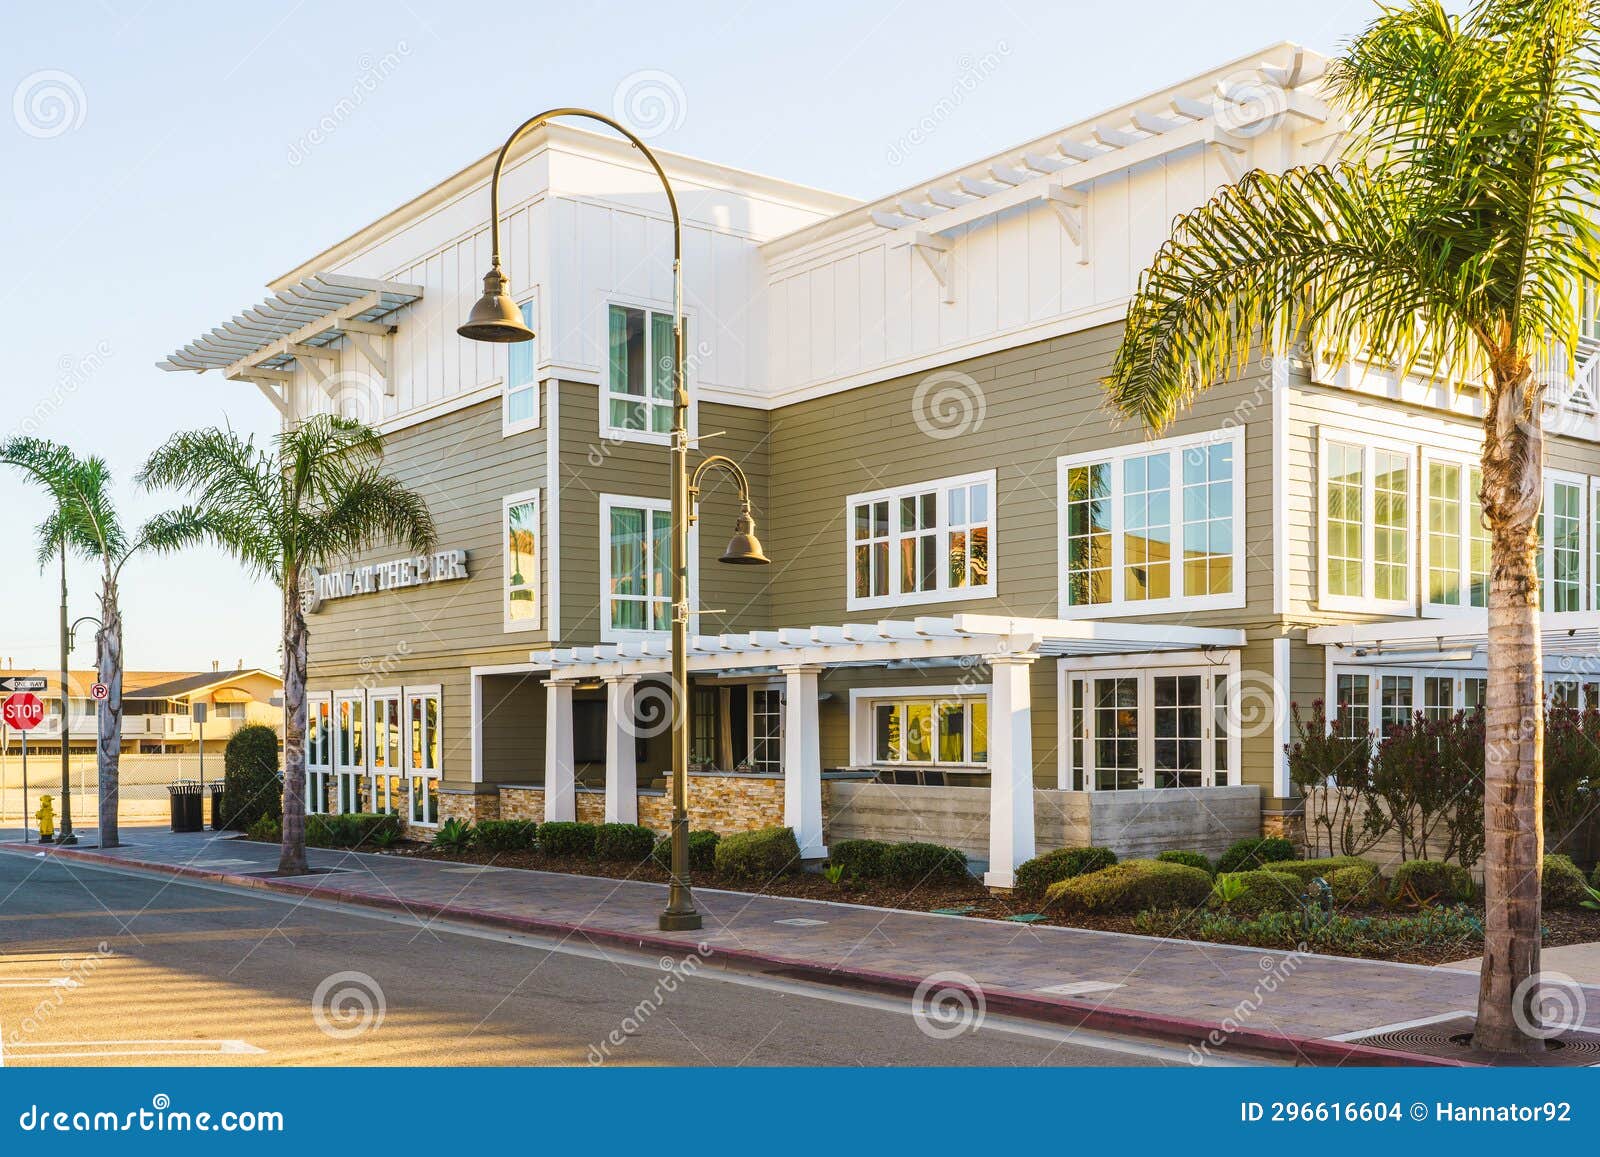 Inn at the Pier Cypress Beach House, an Oceanfront Hotel in Pismo Beach,  California Editorial Stock Image - Image of architectural, balcony:  296616604